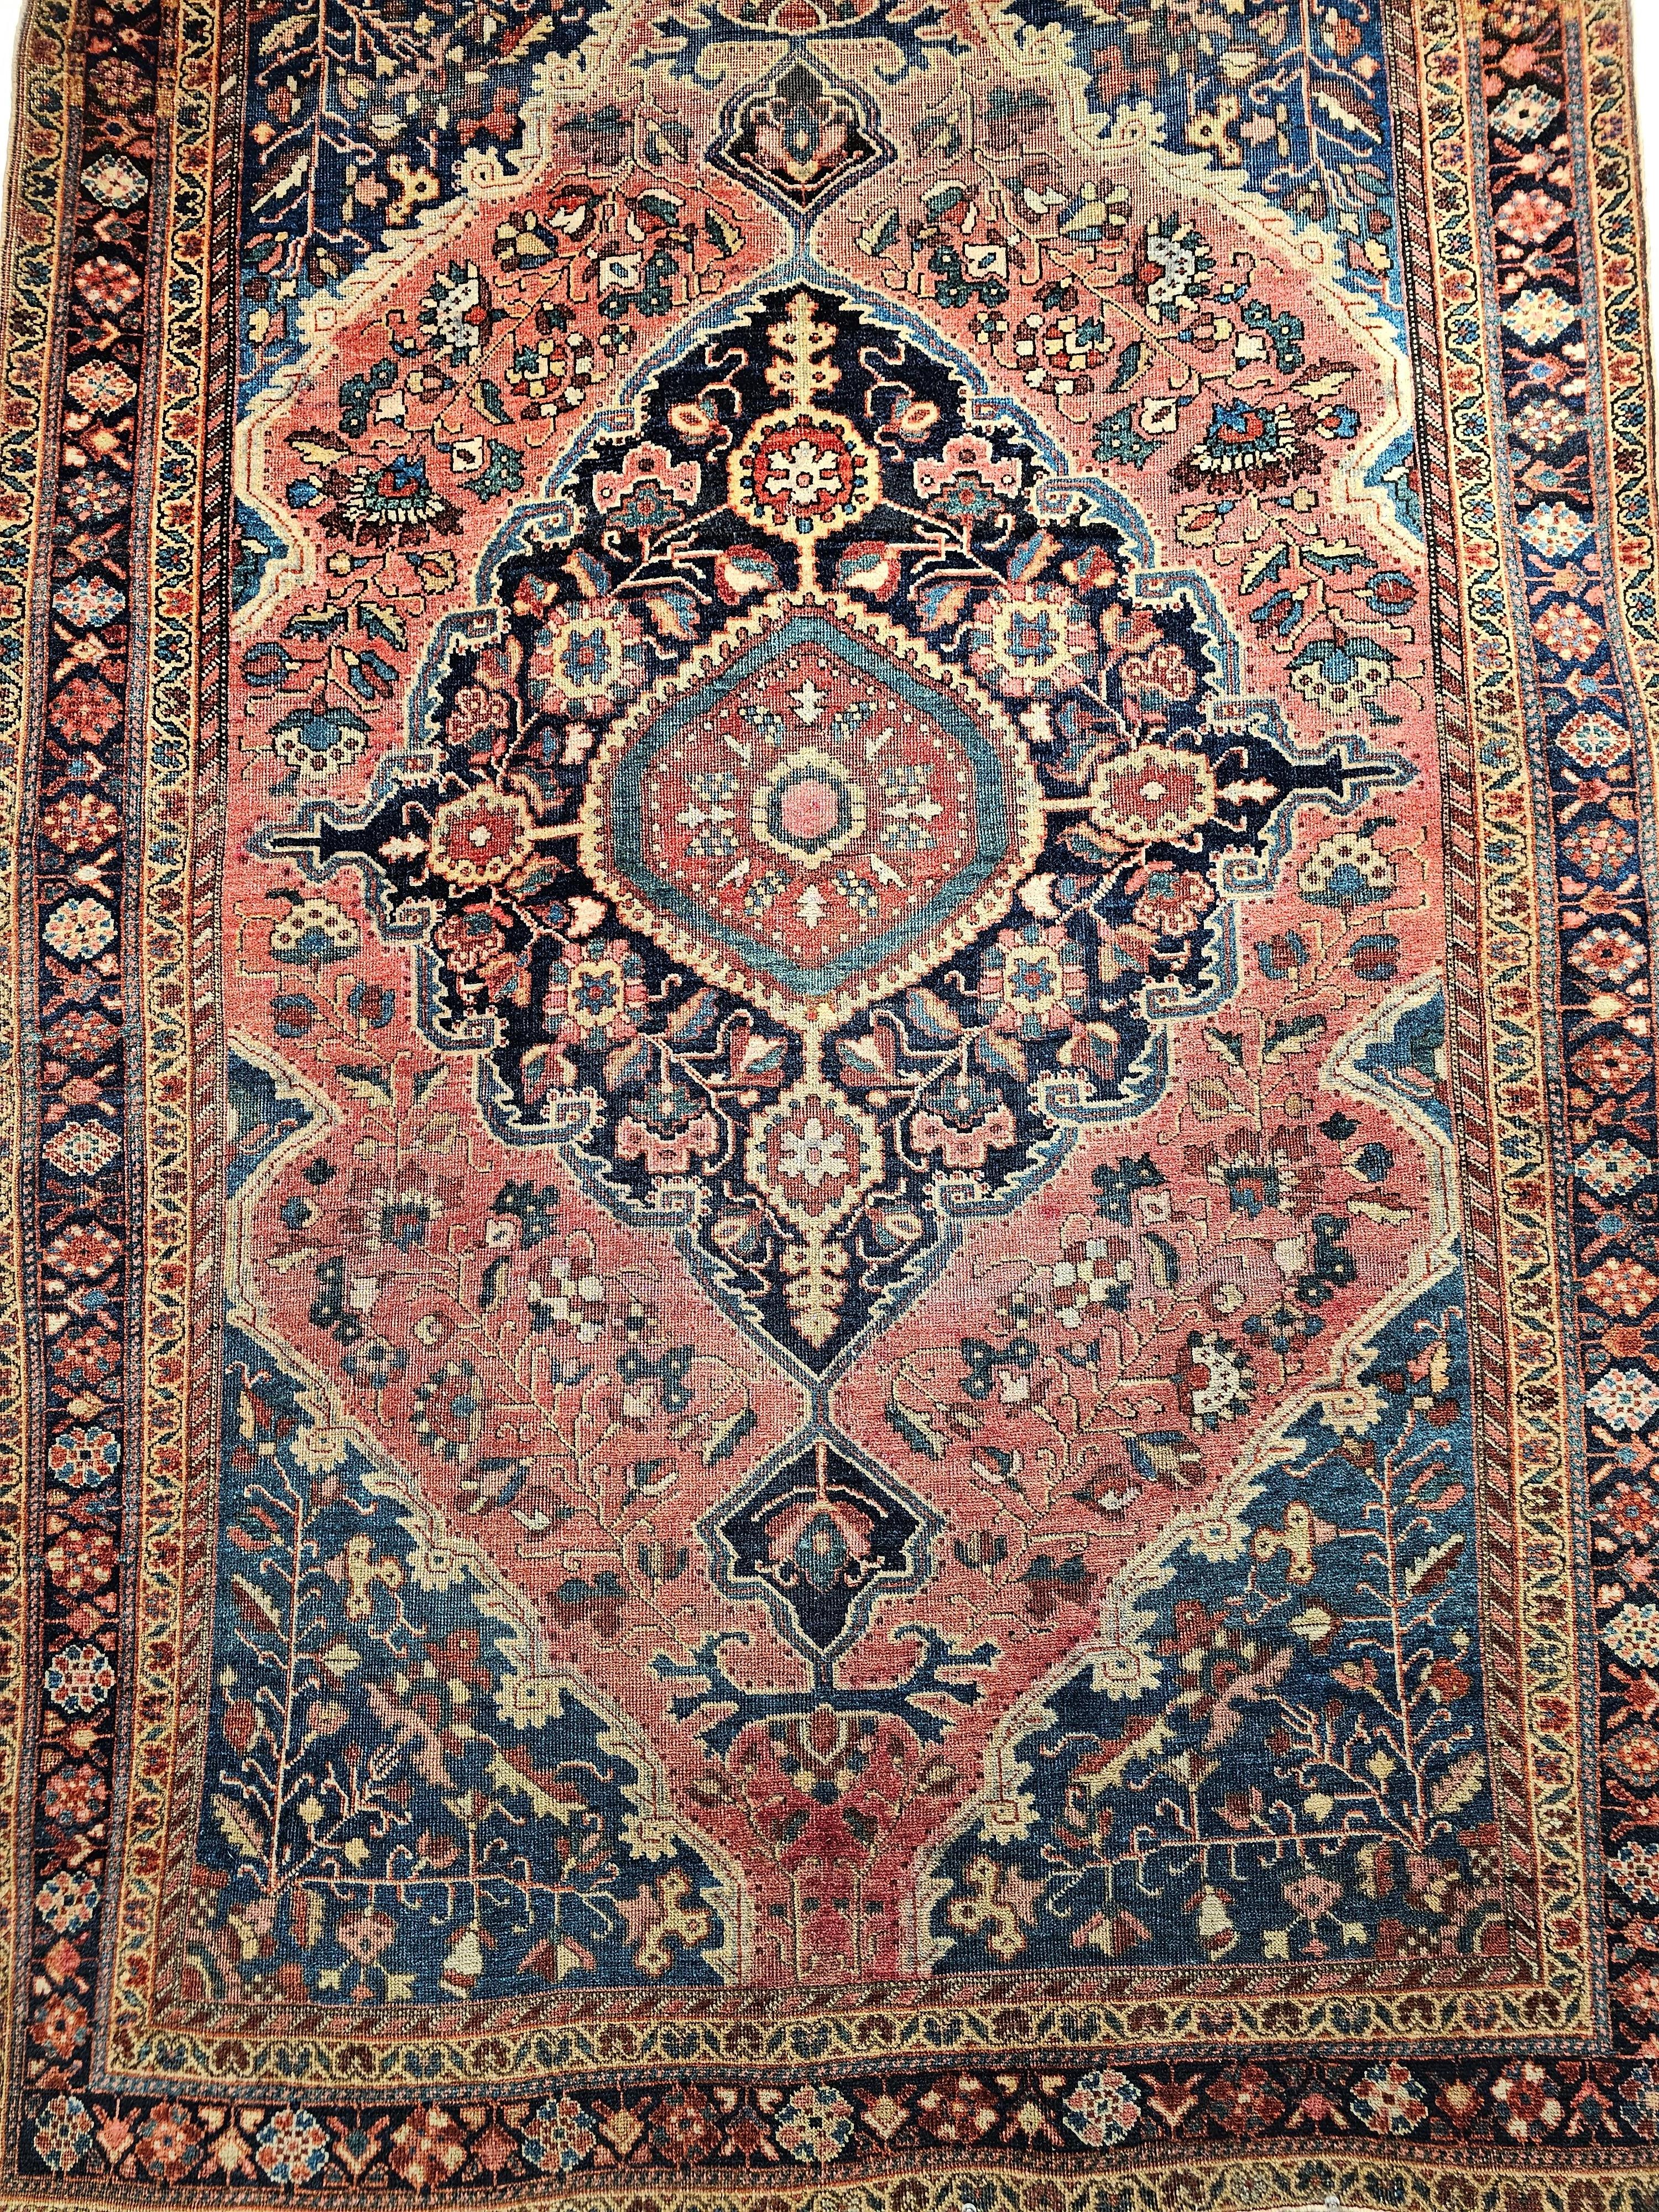 19th Century Persian Farahan Sarouk Area Rug in Rust Red, French Blue, Navy Blue In Good Condition For Sale In Barrington, IL